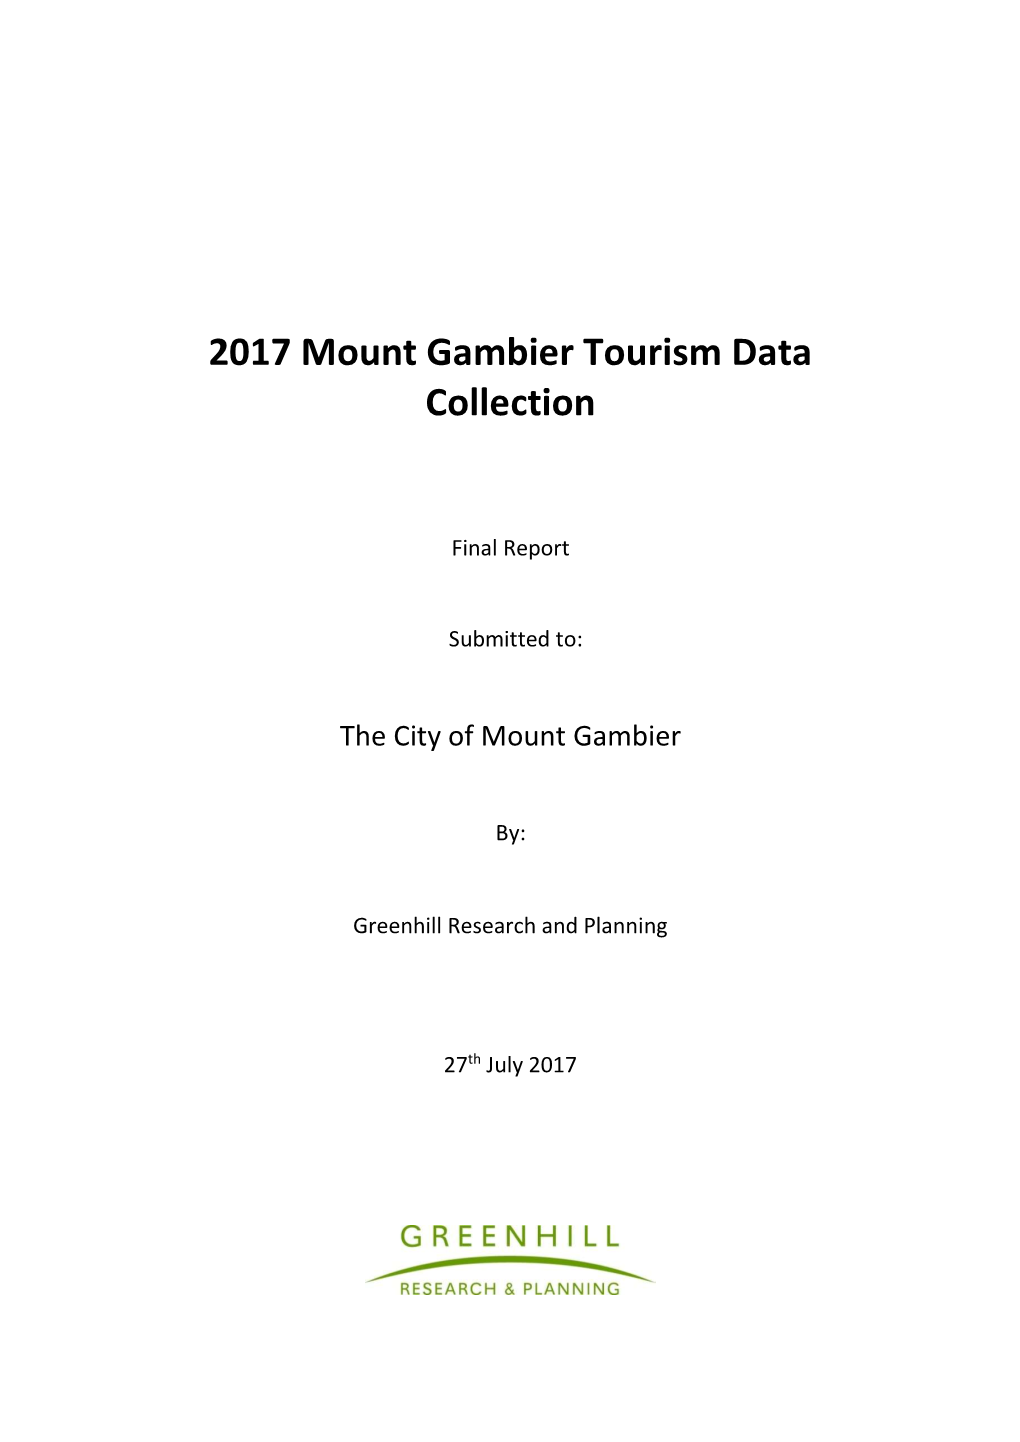 2017 Mount Gambier Tourism Data Collection